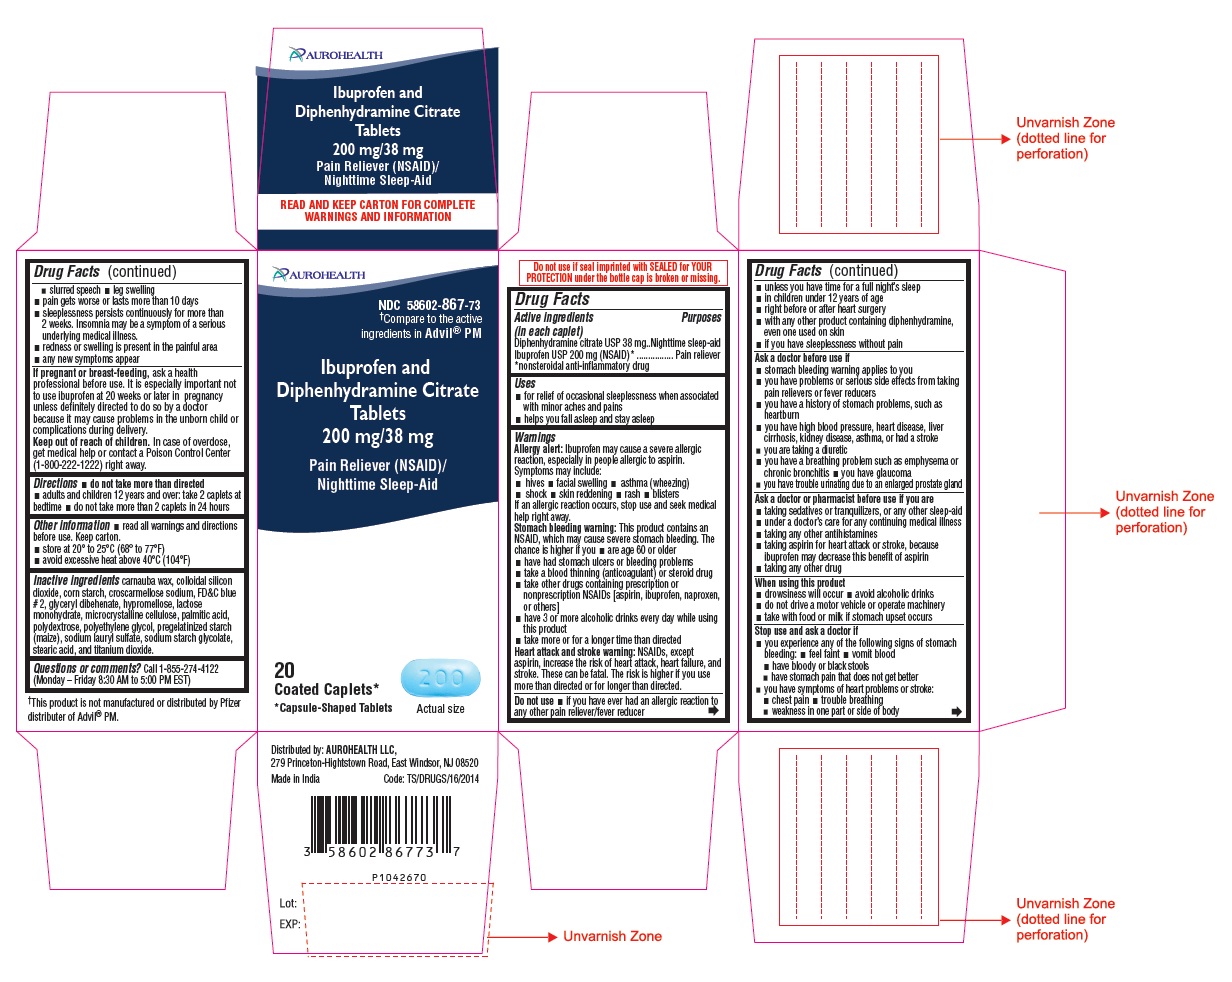 PACKAGE LABEL-PRINCIPAL DISPLAY PANEL - 200 mg/38 mg (20 Coated Caplets) Bottle Carton Label